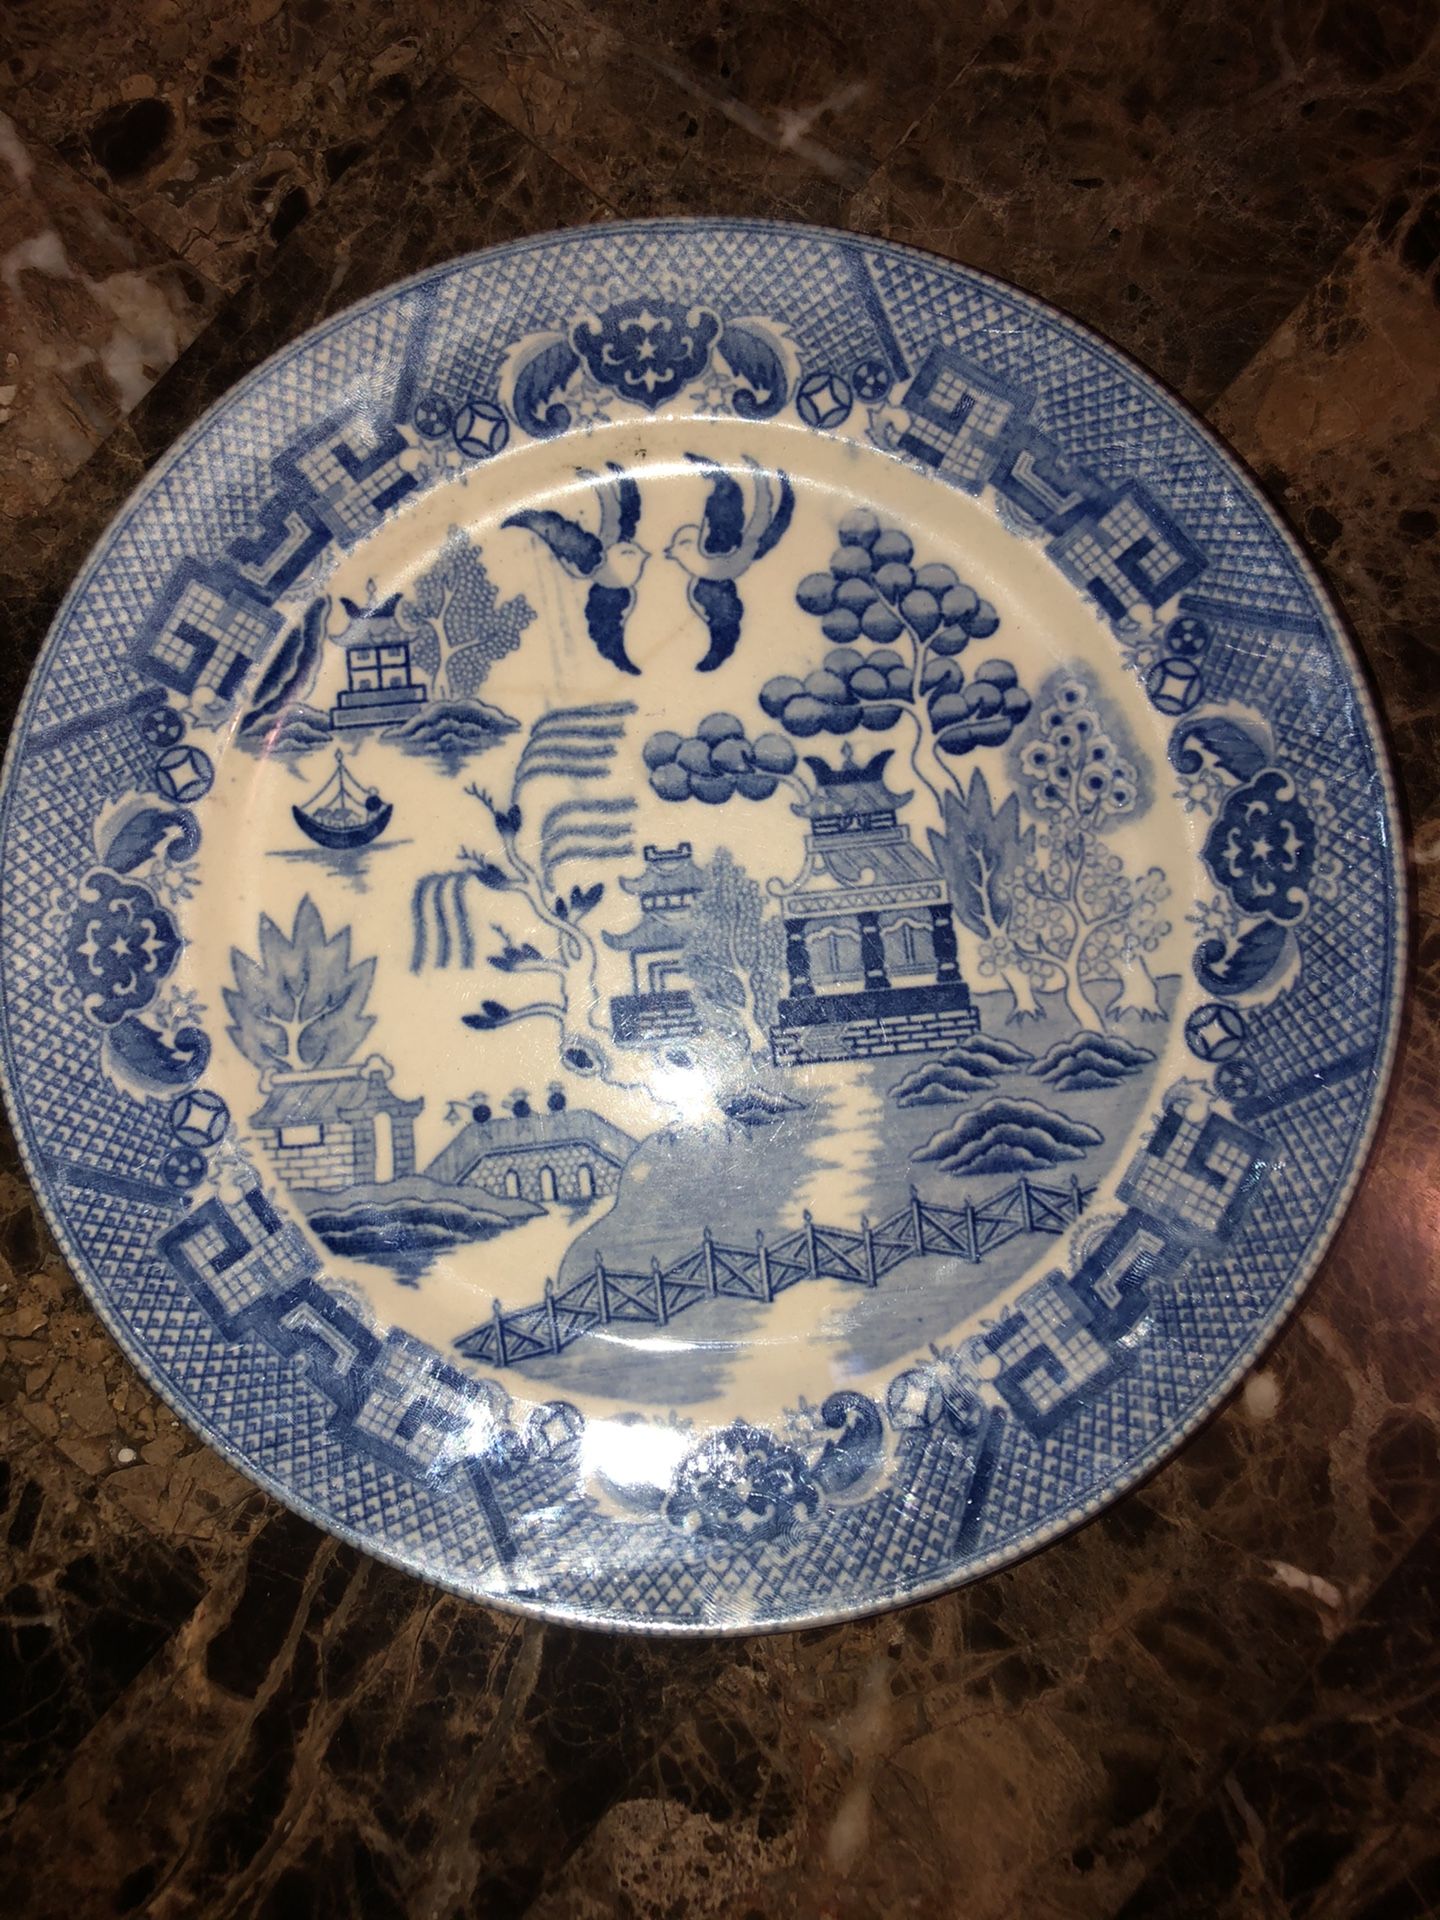 VINTAGE BLUE WILLOW WHITE BLUE CHINESE JAPANESE TRANSFERWARE PLATE 9"